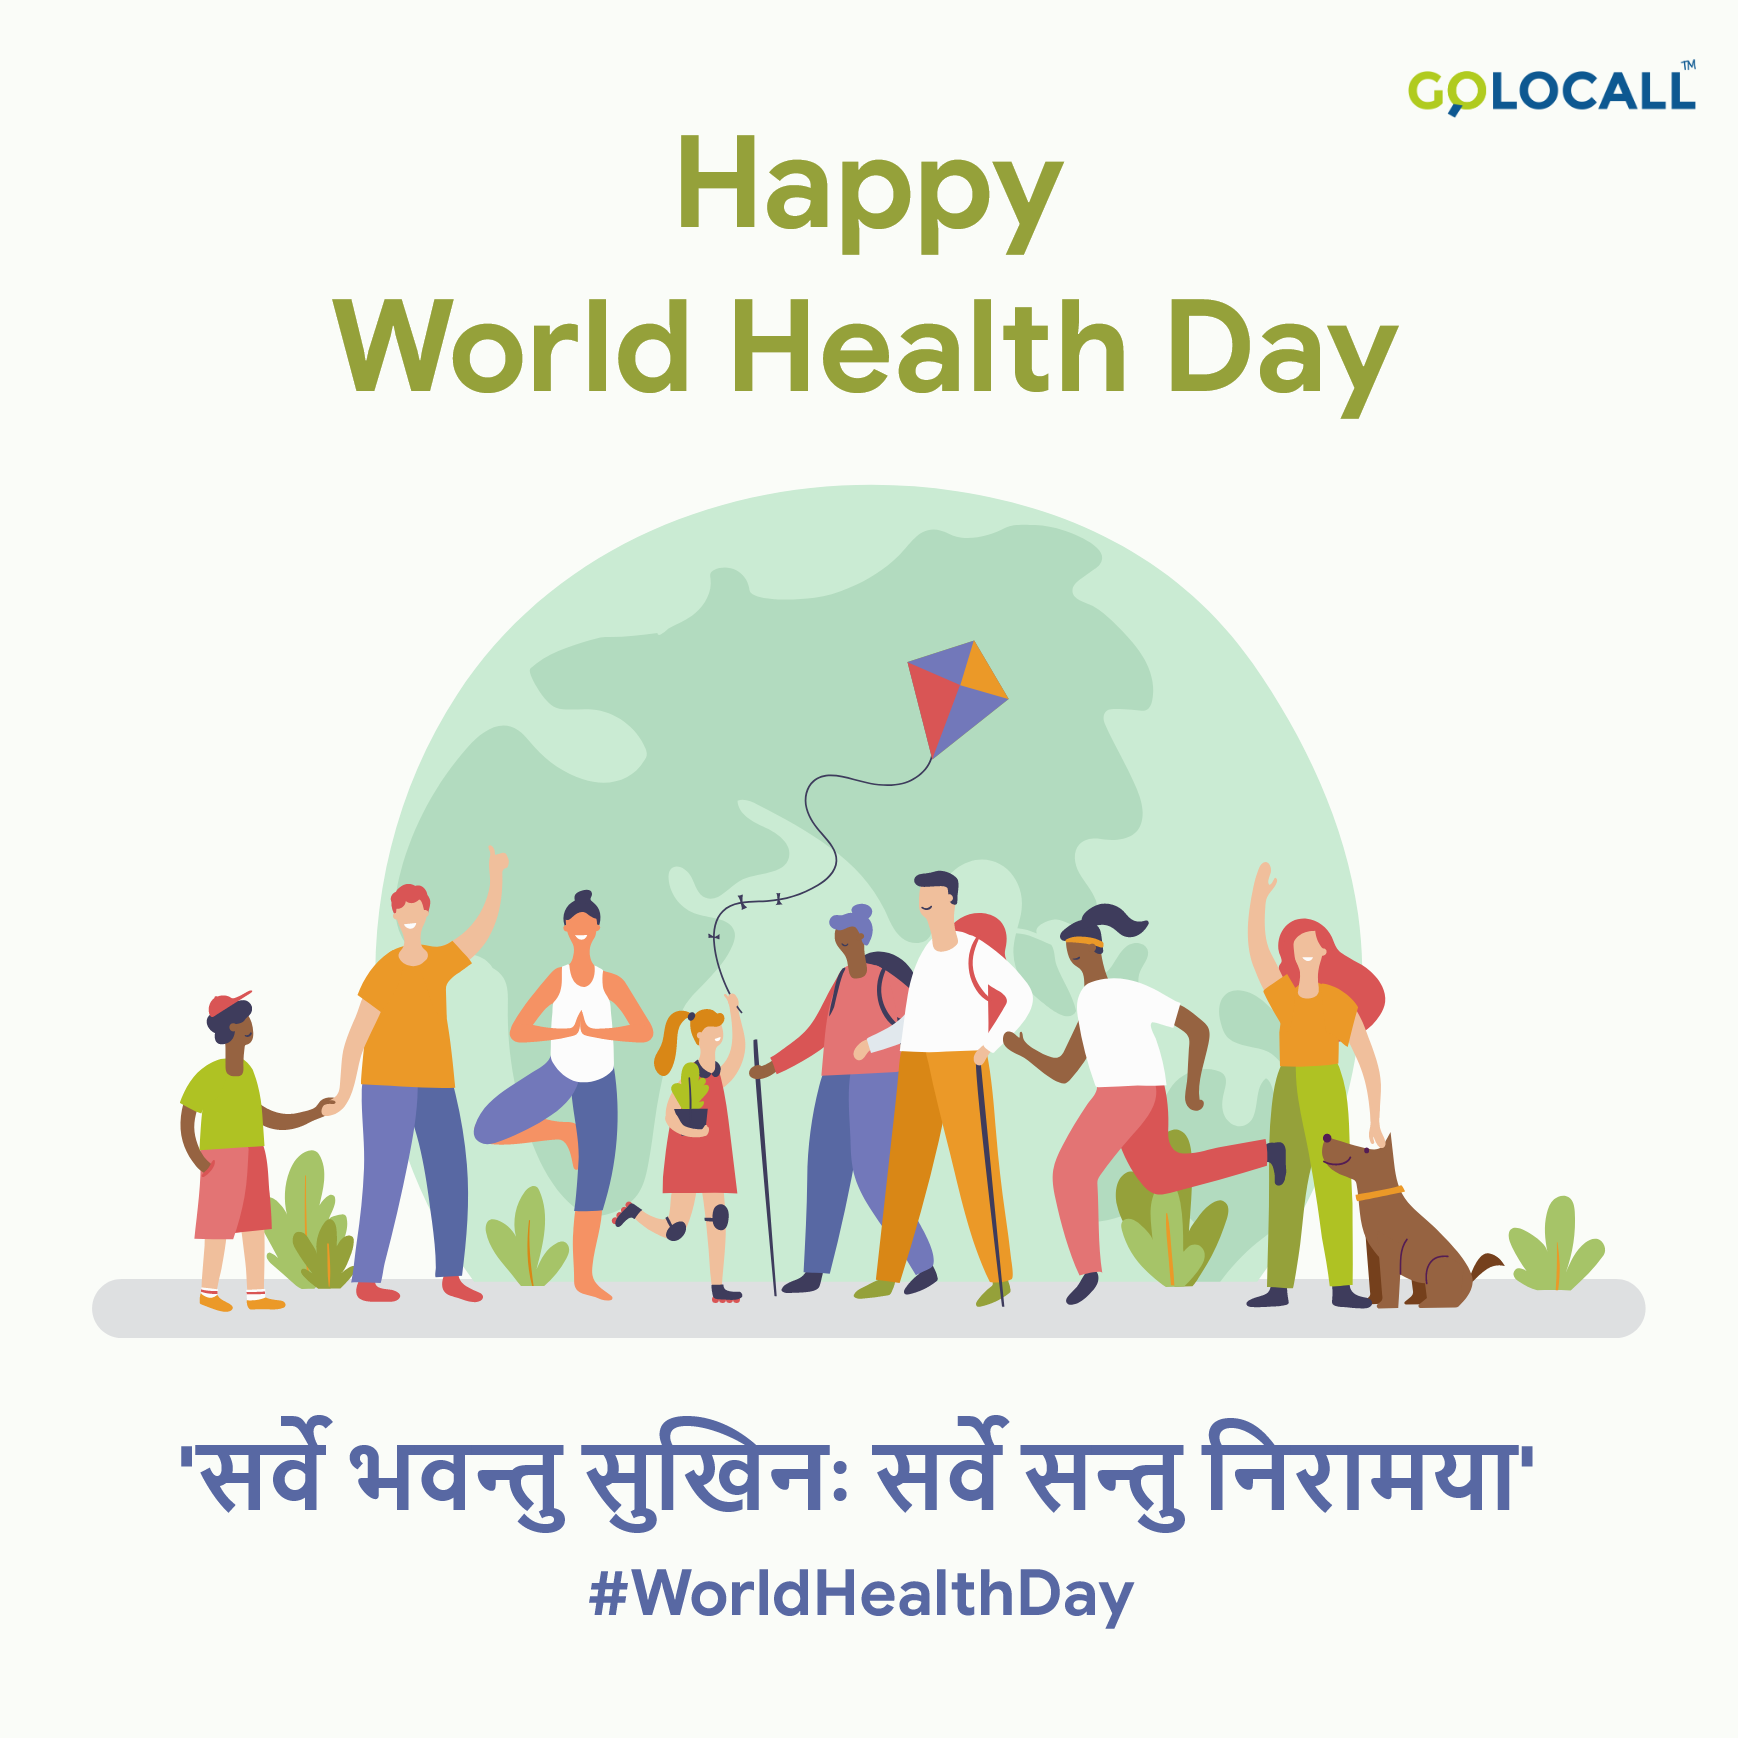 Lets celebrated  World Health Day | GoLocall Web Services Private Limited | WorldHealthDay, get your business website - GL105070